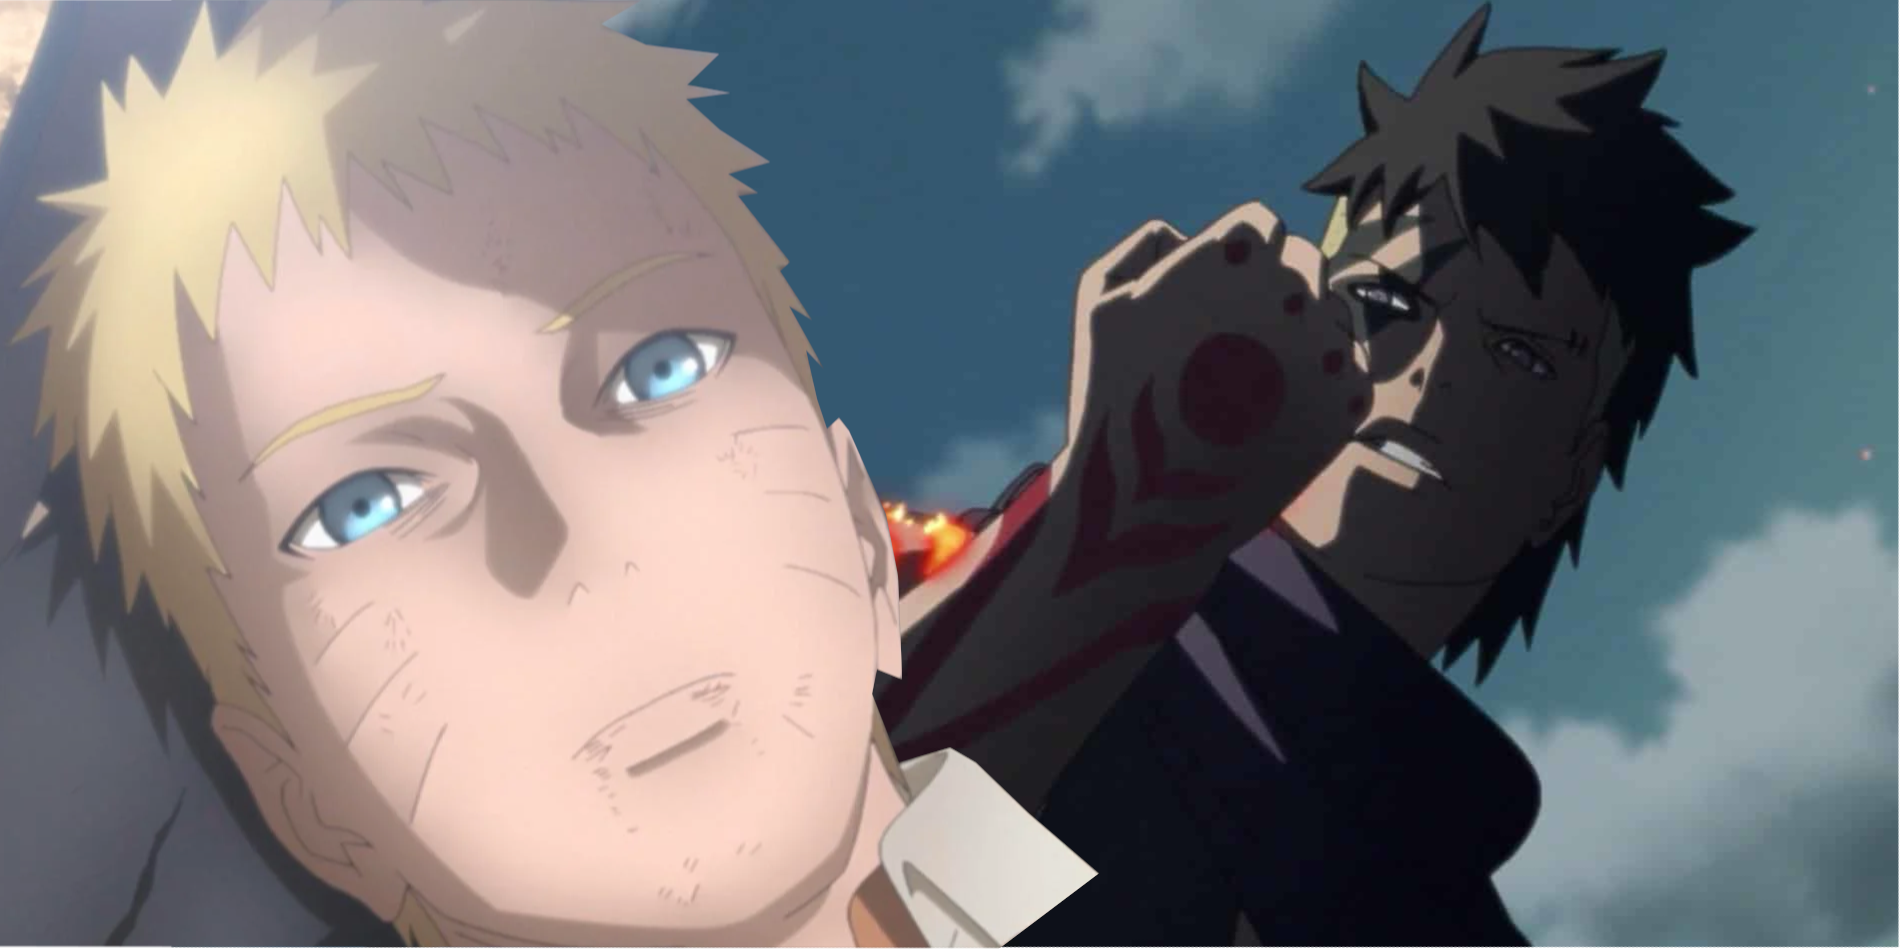 Naruto is seen lying down and looking sad towards the sky while an image of an older Kawaki is seen clenching his fist while his shoulder glows with a red power.